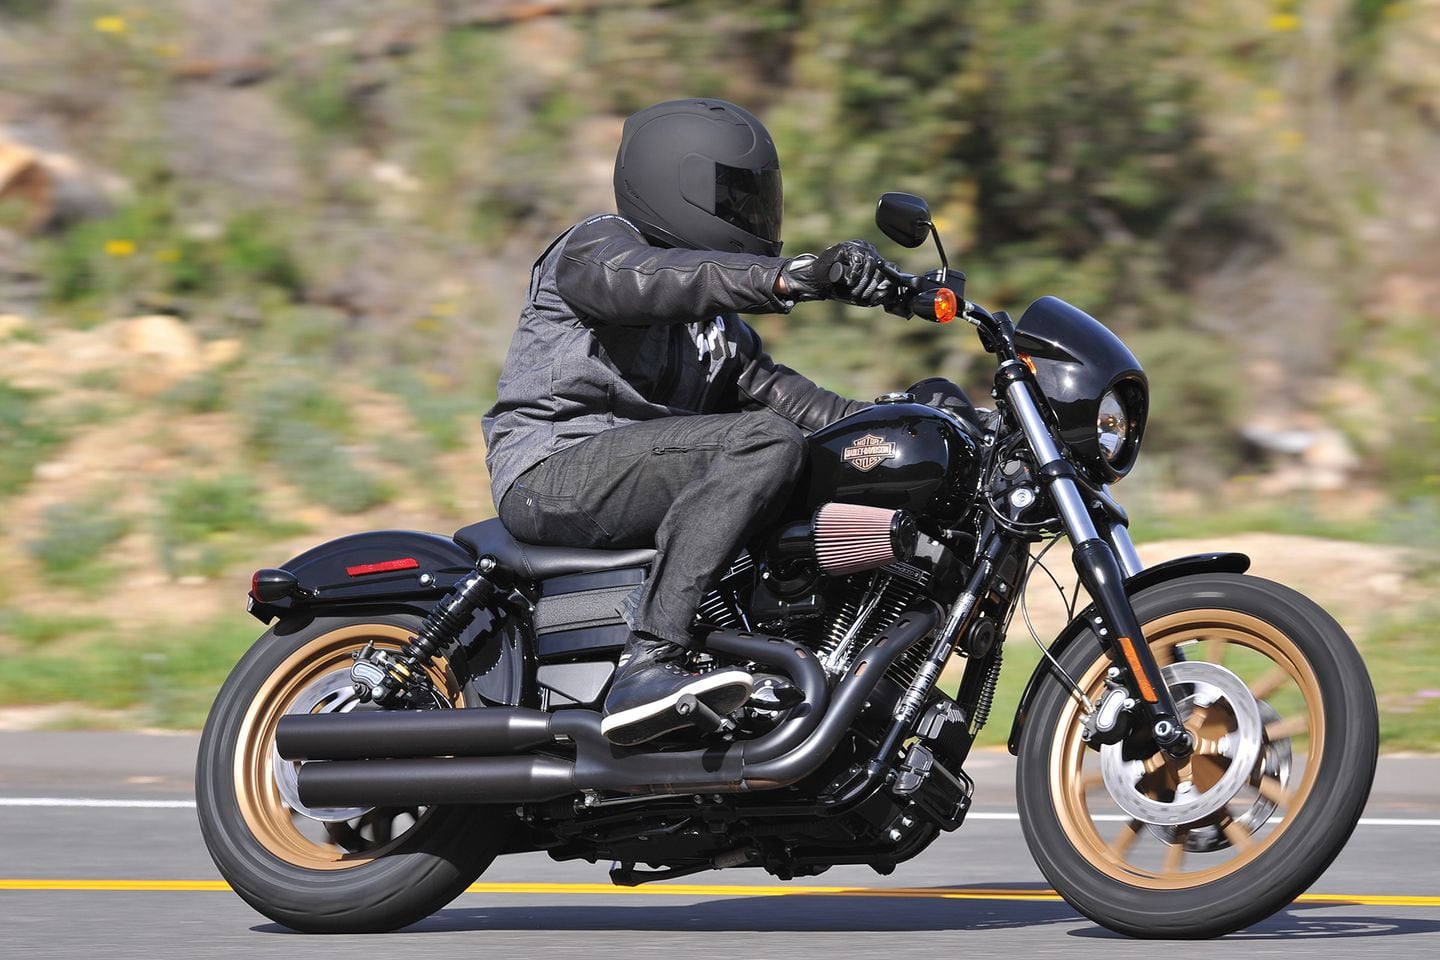 2016 Harley Davidson Low Rider S First Ride Review Cycle World